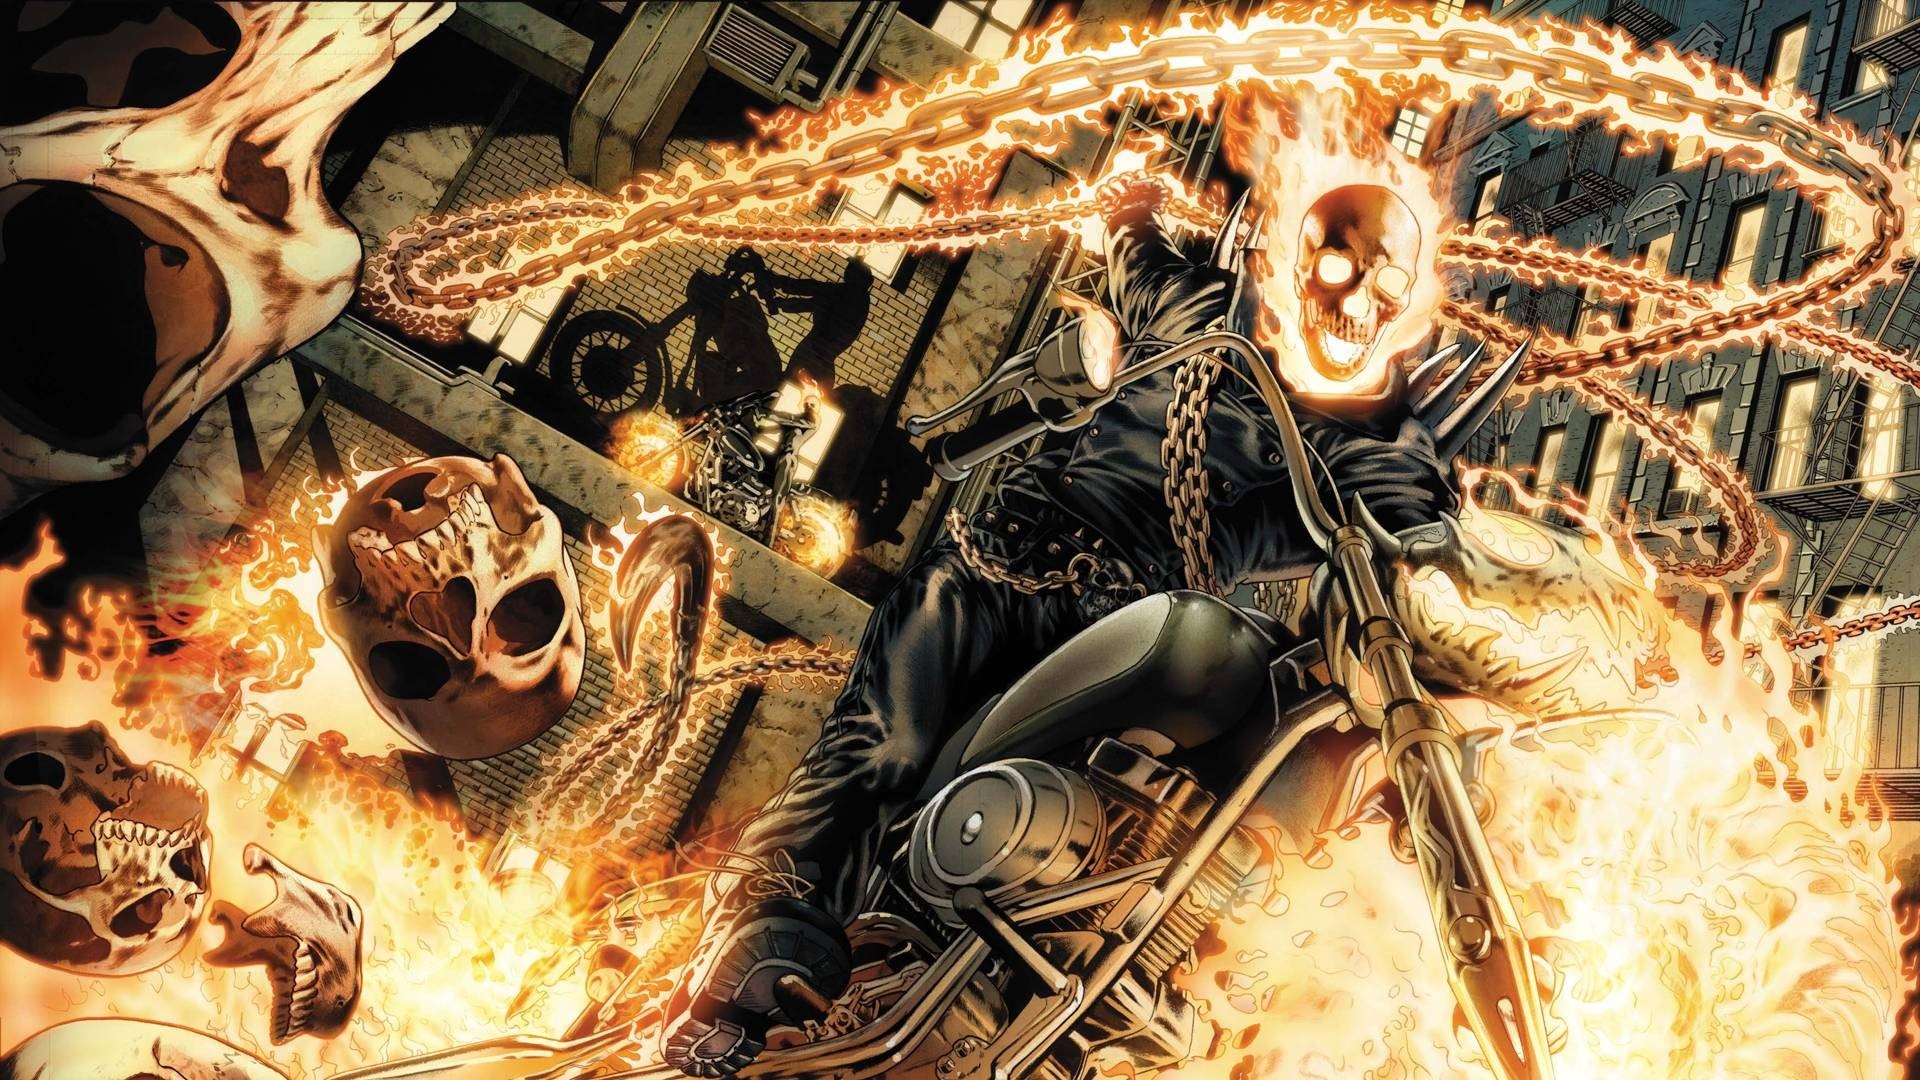 1920x1080  Download Ghost Rider Motorcycle Fire Flame Skull Chain wallpaper .